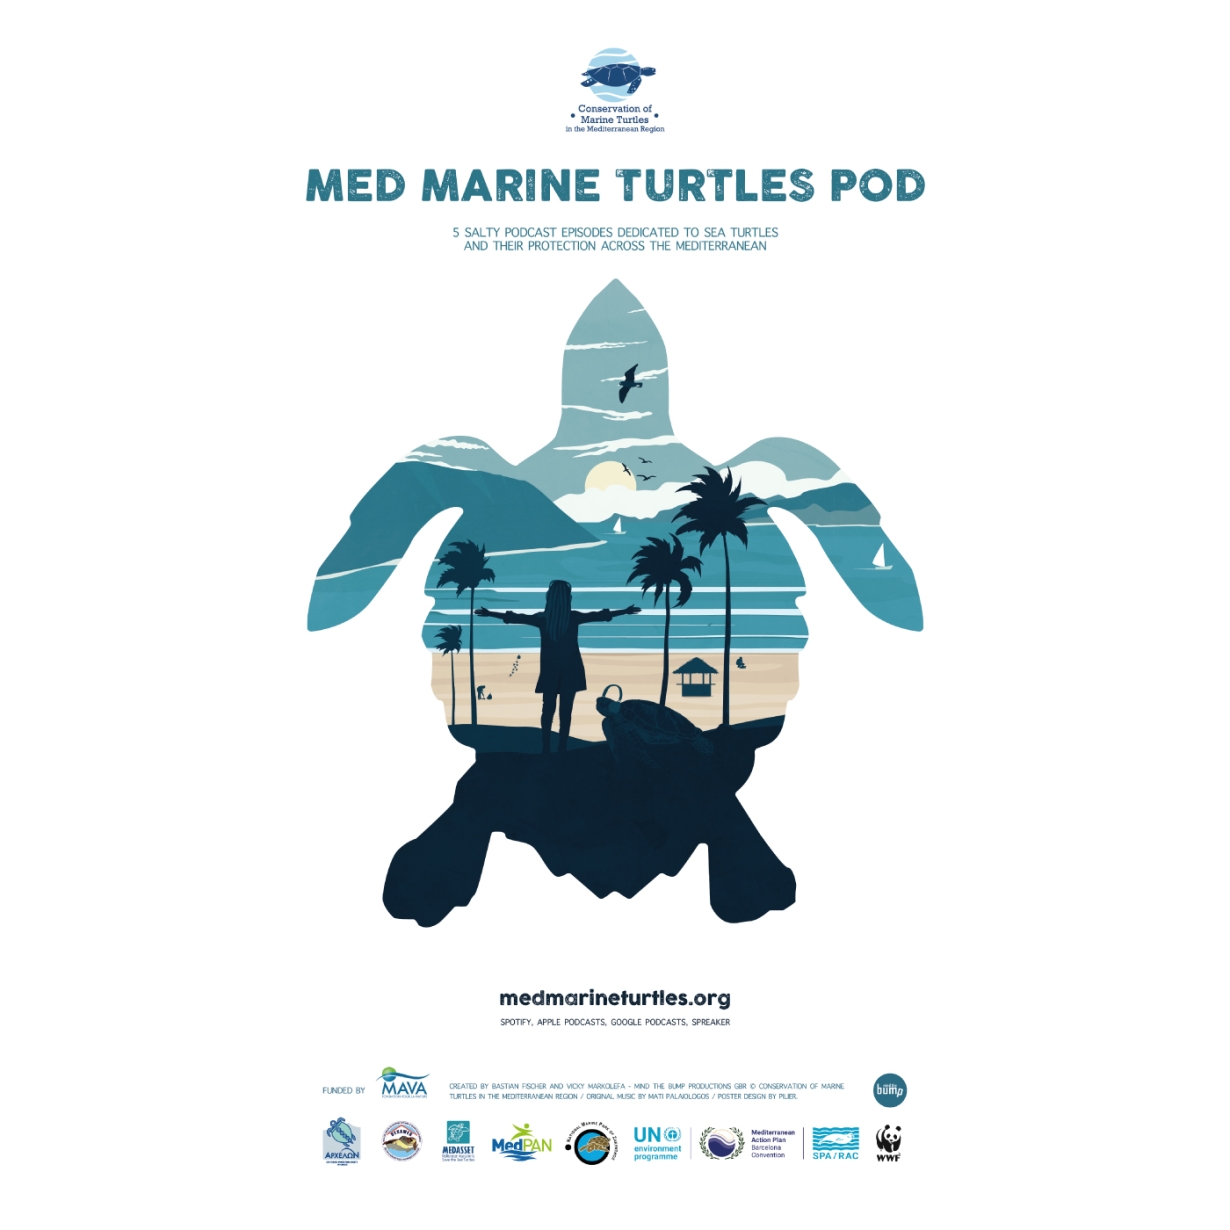 MEDMARINETURTLES POD_BEING PASSIONATE ABOUT THE ENVIRONMENT